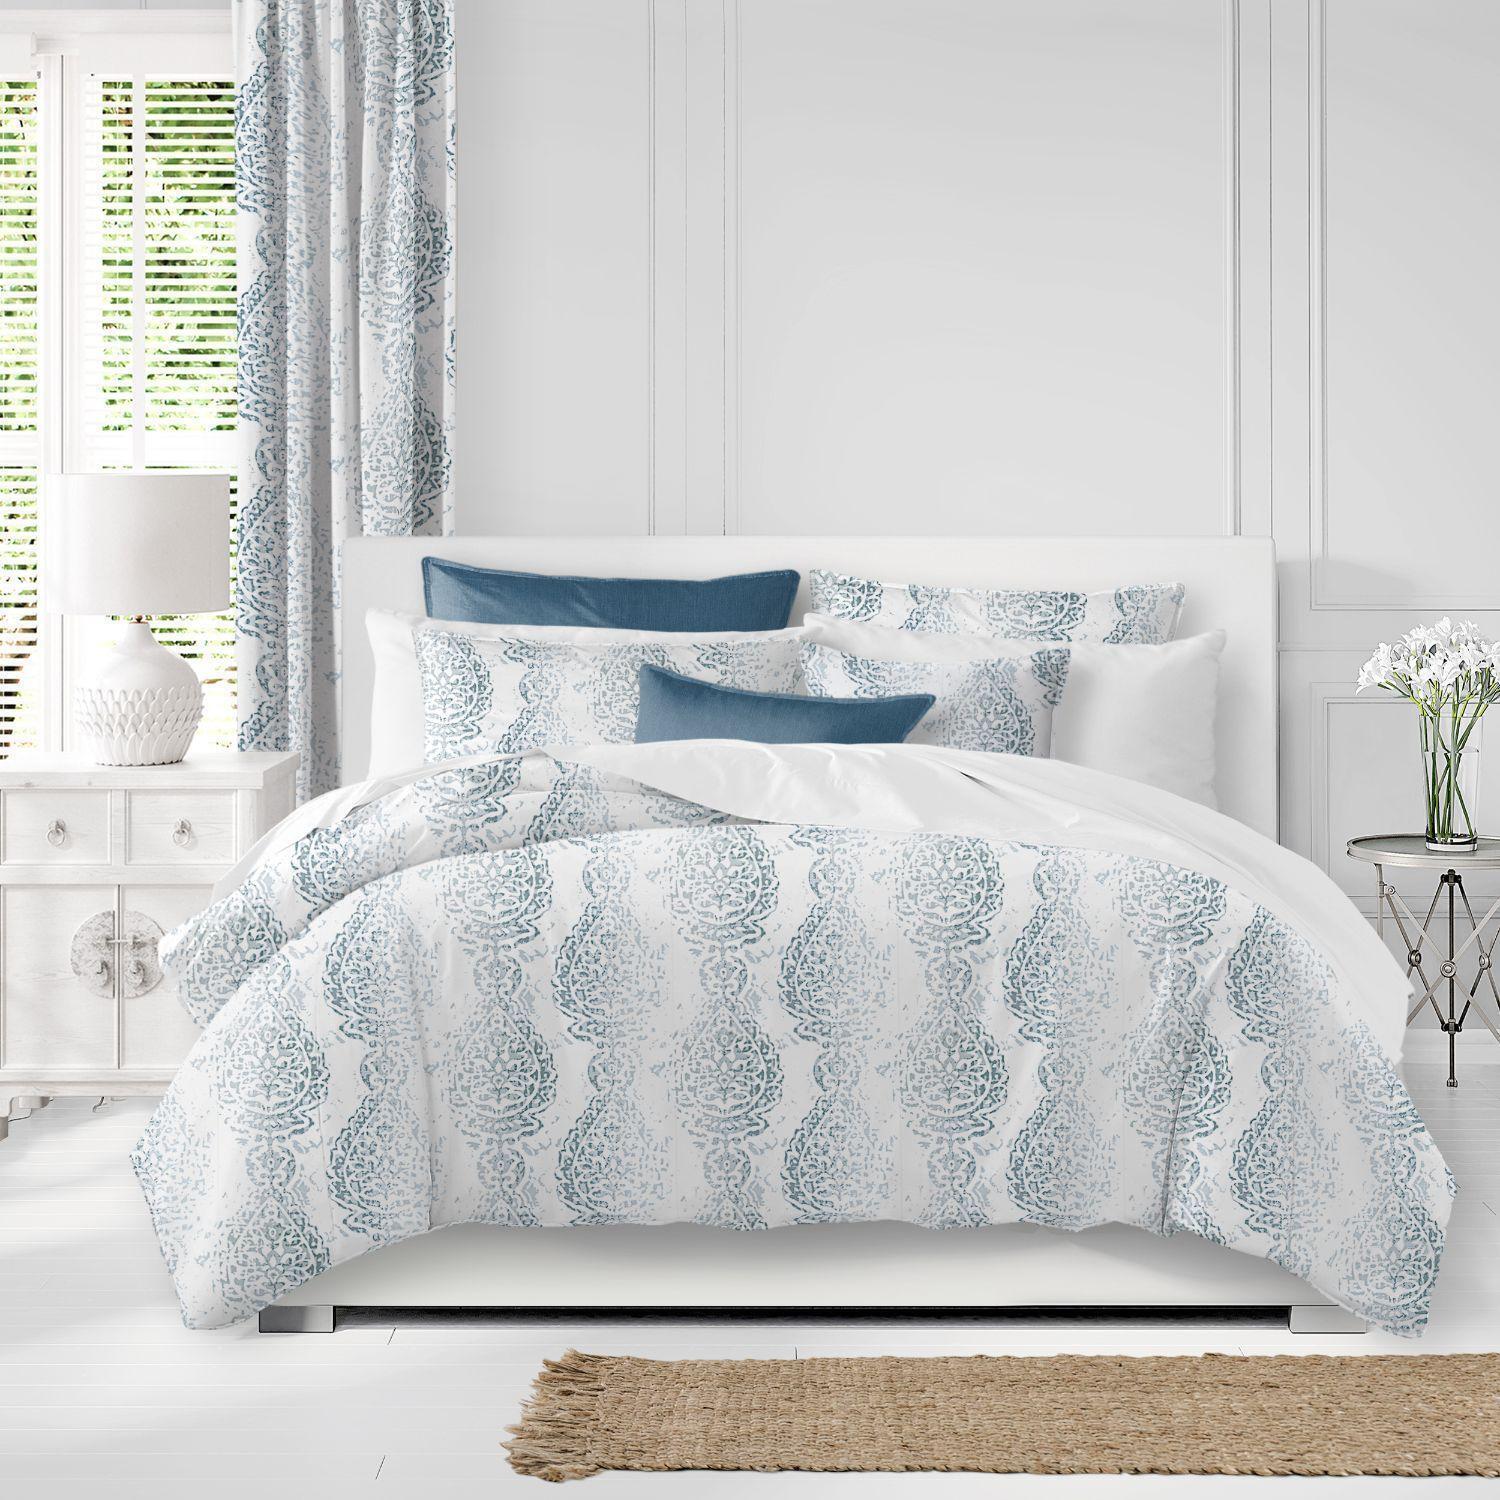 Set of 3 White and Blue Distressed Paisley Comforter with Pillow Shams - Super Queen